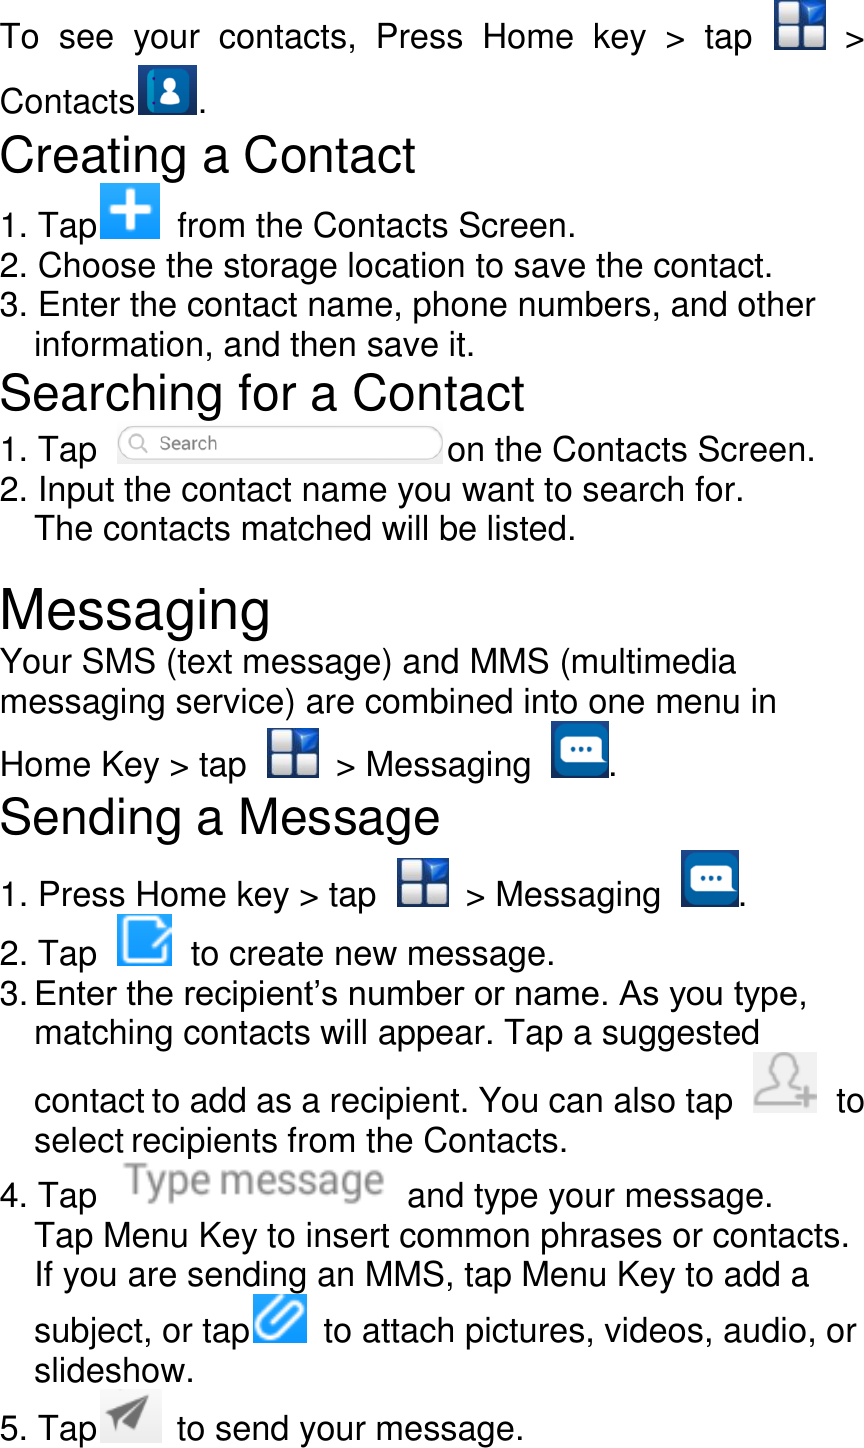 To  see  your  contacts,  Press  Home  key  &gt;  tap    &gt; Contacts . Creating a Contact 1. Tap   from the Contacts Screen. 2. Choose the storage location to save the contact. 3. Enter the contact name, phone numbers, and other information, and then save it. Searching for a Contact 1. Tap    on the Contacts Screen. 2. Input the contact name you want to search for. The contacts matched will be listed.  Messaging Your SMS (text message) and MMS (multimedia messaging service) are combined into one menu in Home Key &gt; tap    &gt; Messaging  . Sending a Message 1. Press Home key &gt; tap    &gt; Messaging  . 2. Tap    to create new message. 3. Enter the recipient’s number or name. As you type, matching contacts will appear. Tap a suggested contact to add as a recipient. You can also tap    to select recipients from the Contacts. 4. Tap    and type your message. Tap Menu Key to insert common phrases or contacts. If you are sending an MMS, tap Menu Key to add a subject, or tap   to attach pictures, videos, audio, or slideshow. 5. Tap   to send your message. 